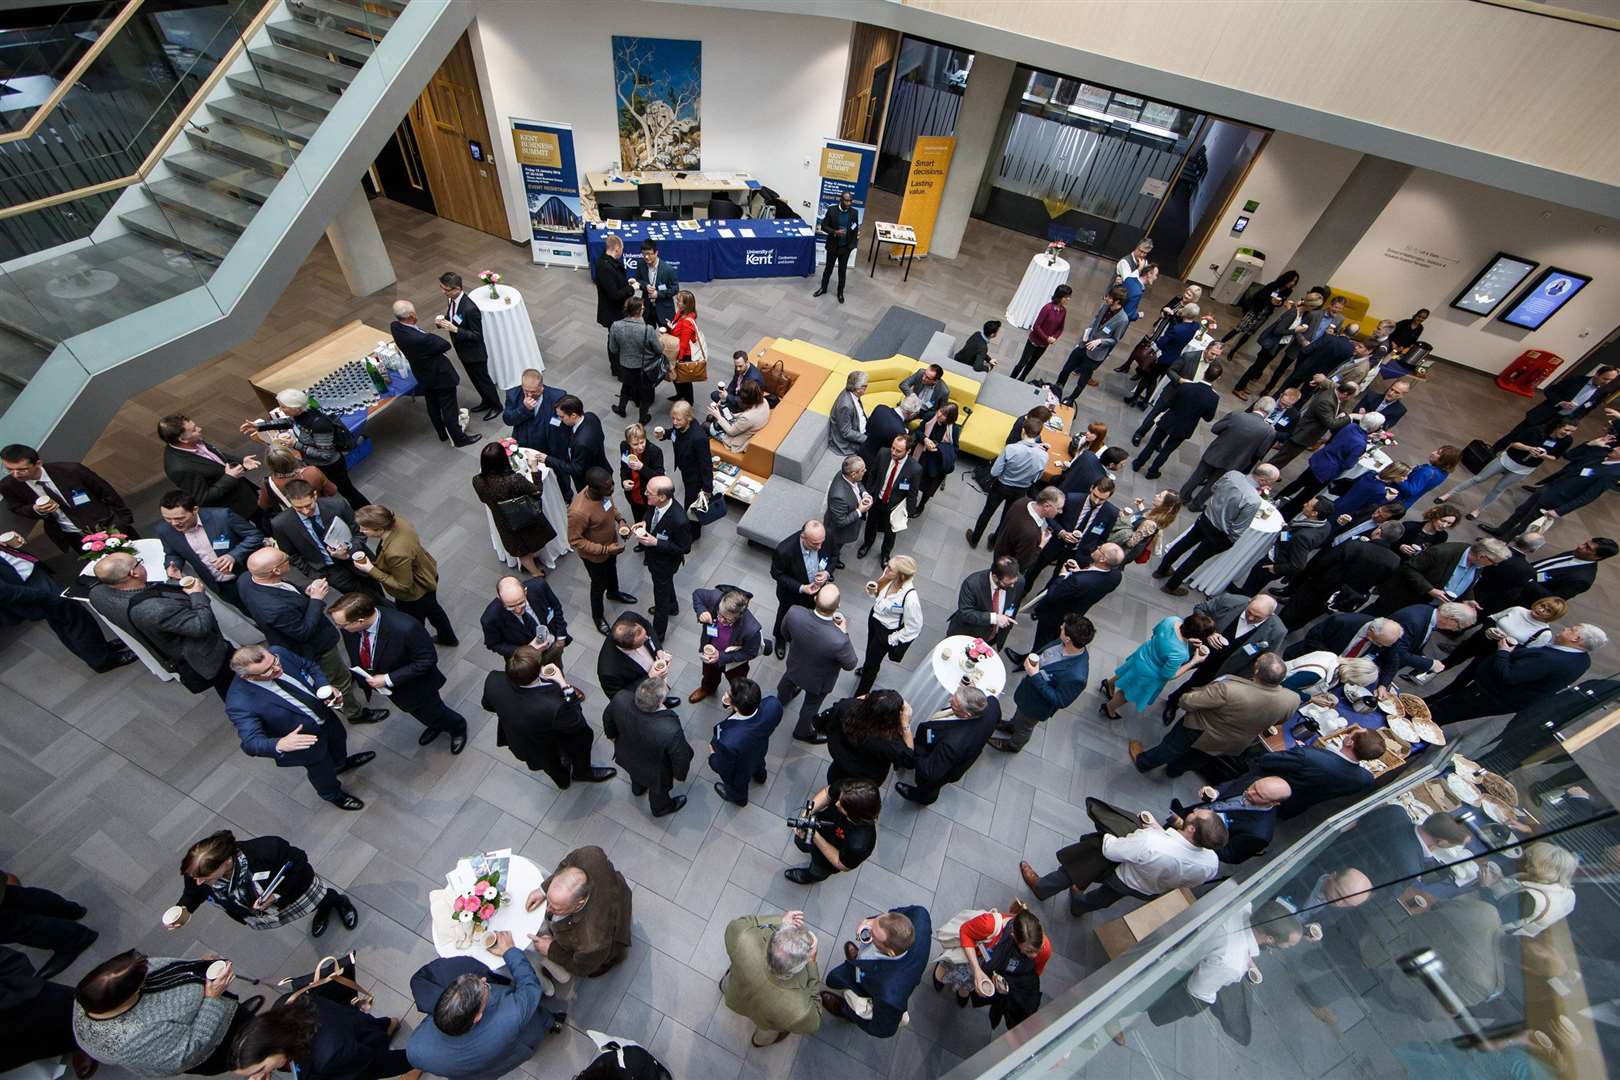 The inaugural Kent Business Summit took place in January this year